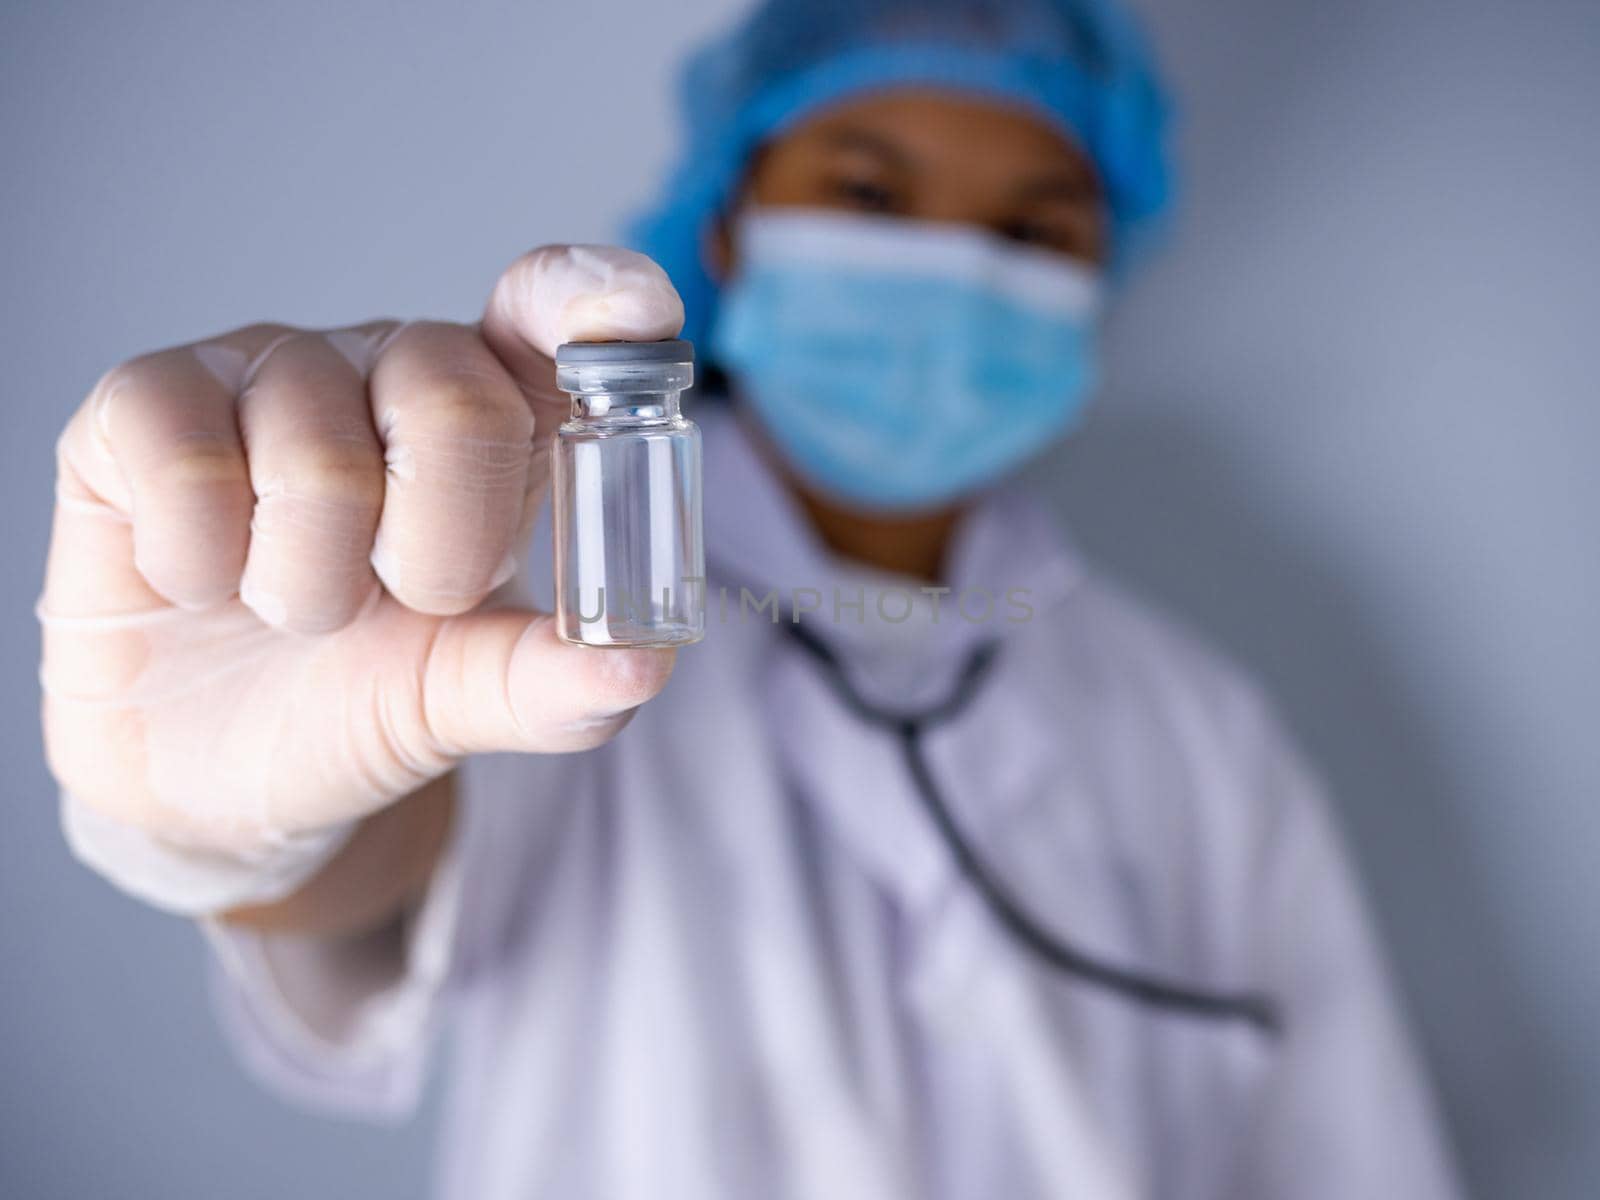 Studio portrait of a female doctor wearing a mask and wearing a hat. in the hand of the vaccine bottle and stretched out his arms in front standing on a white background. studio shot background, COVID-19 concept